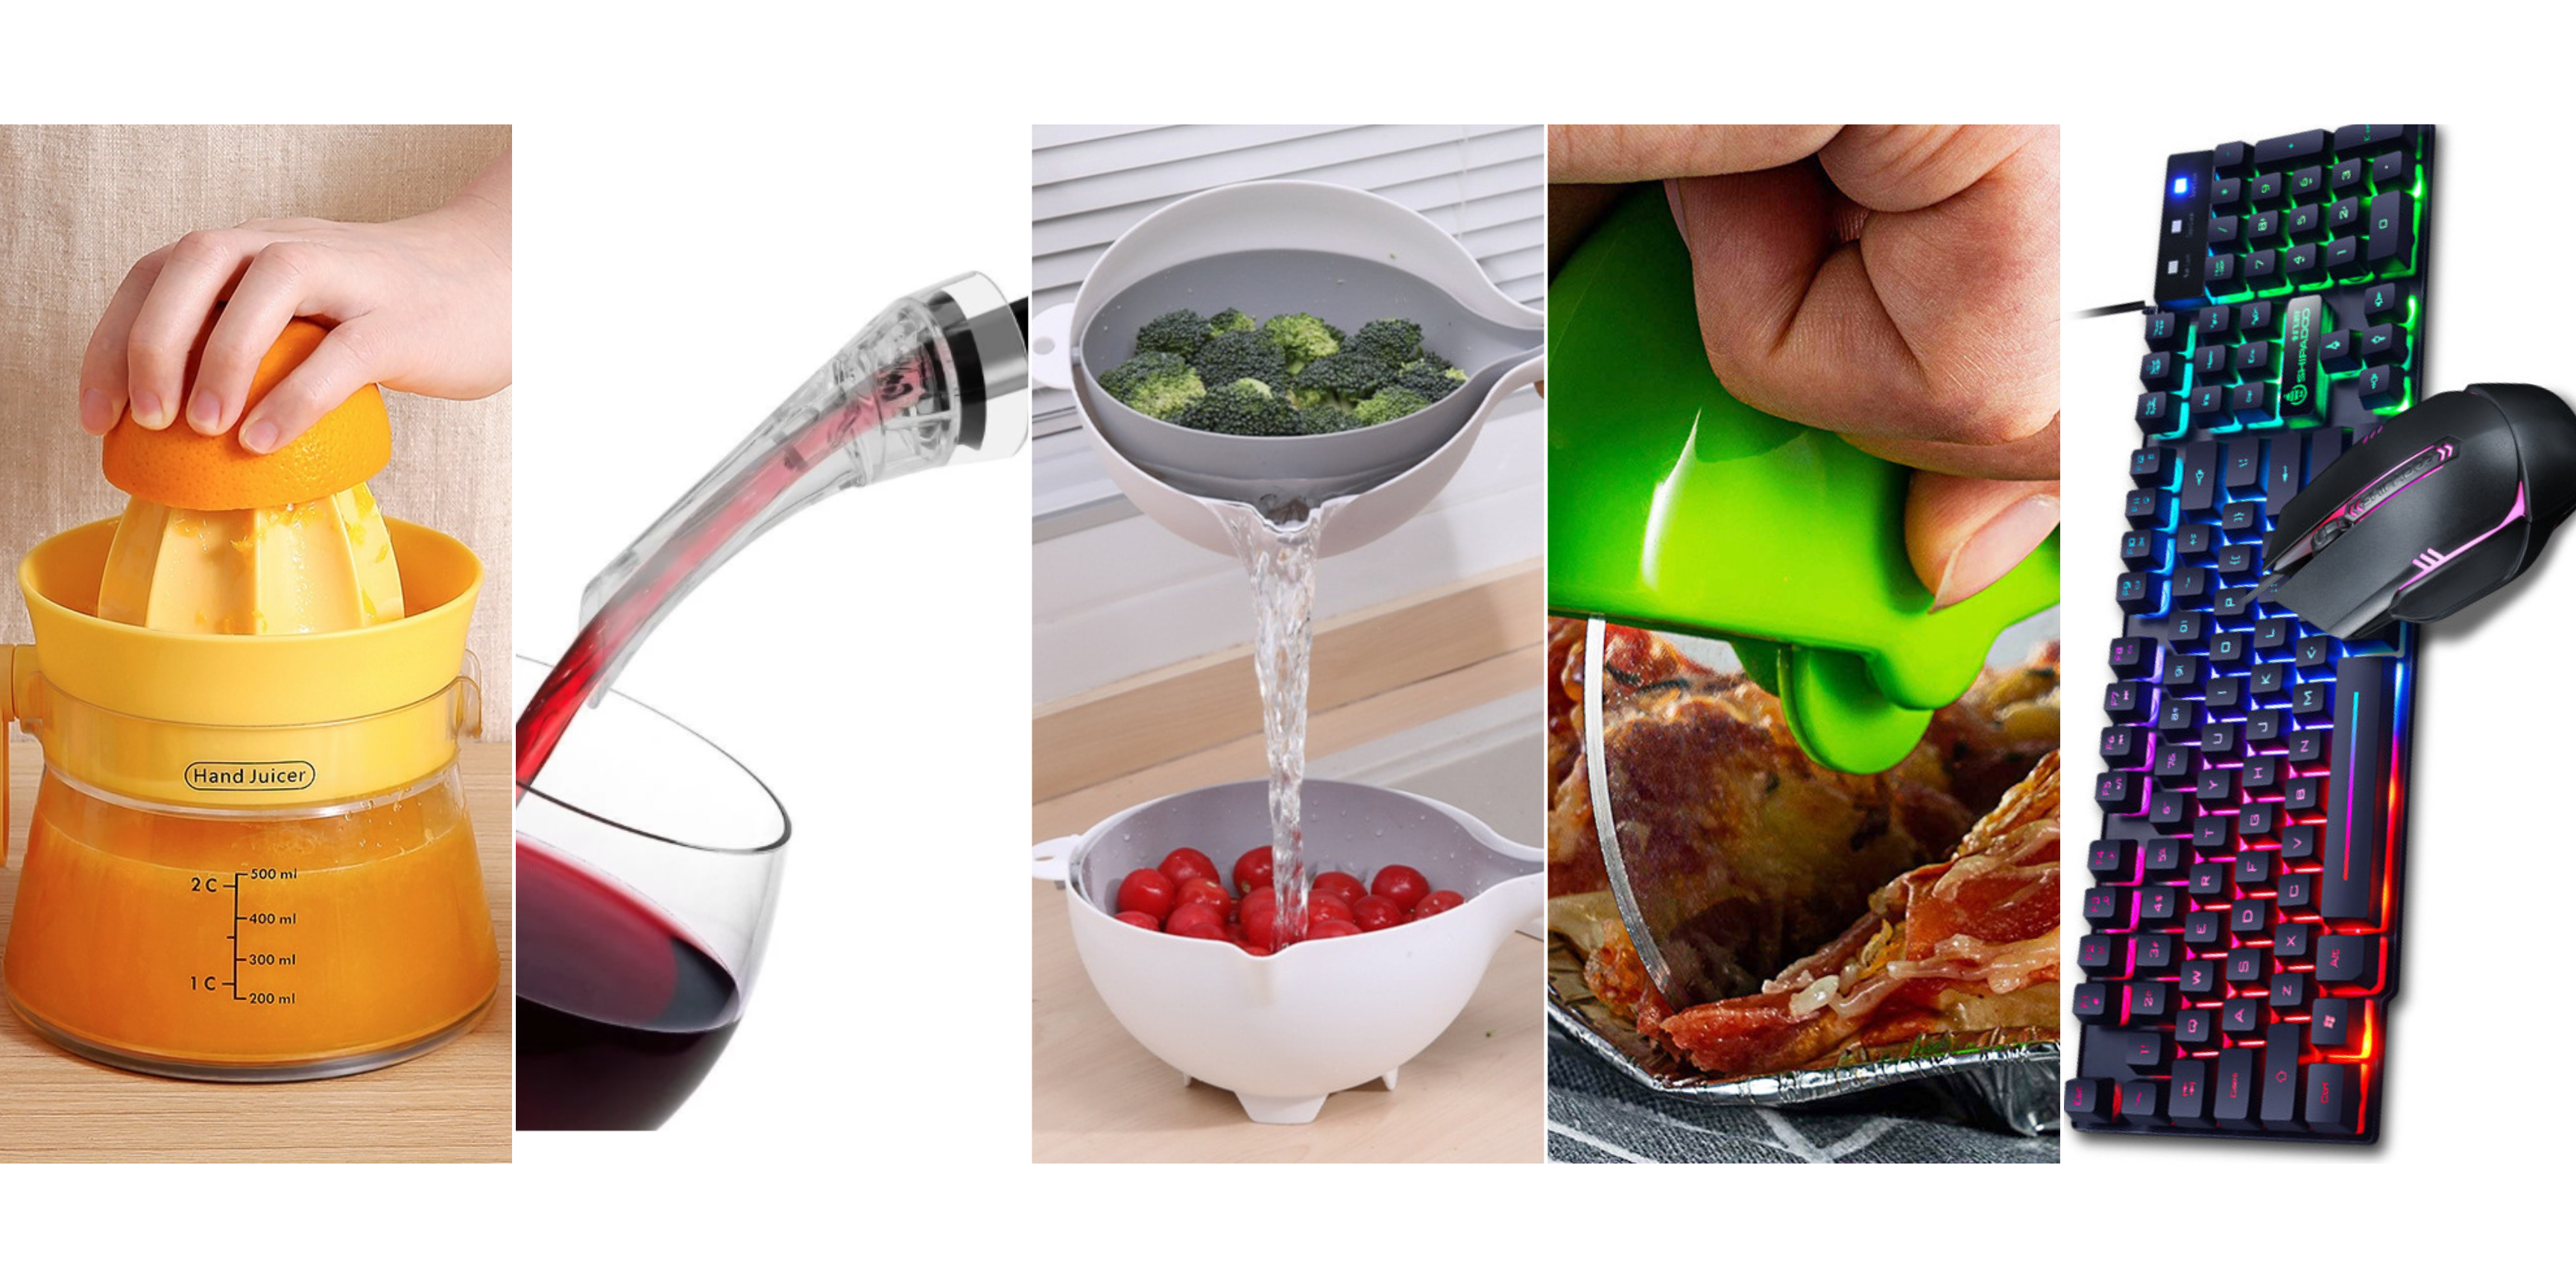 Gadgets and Accessories for the Kitchen and around the Home